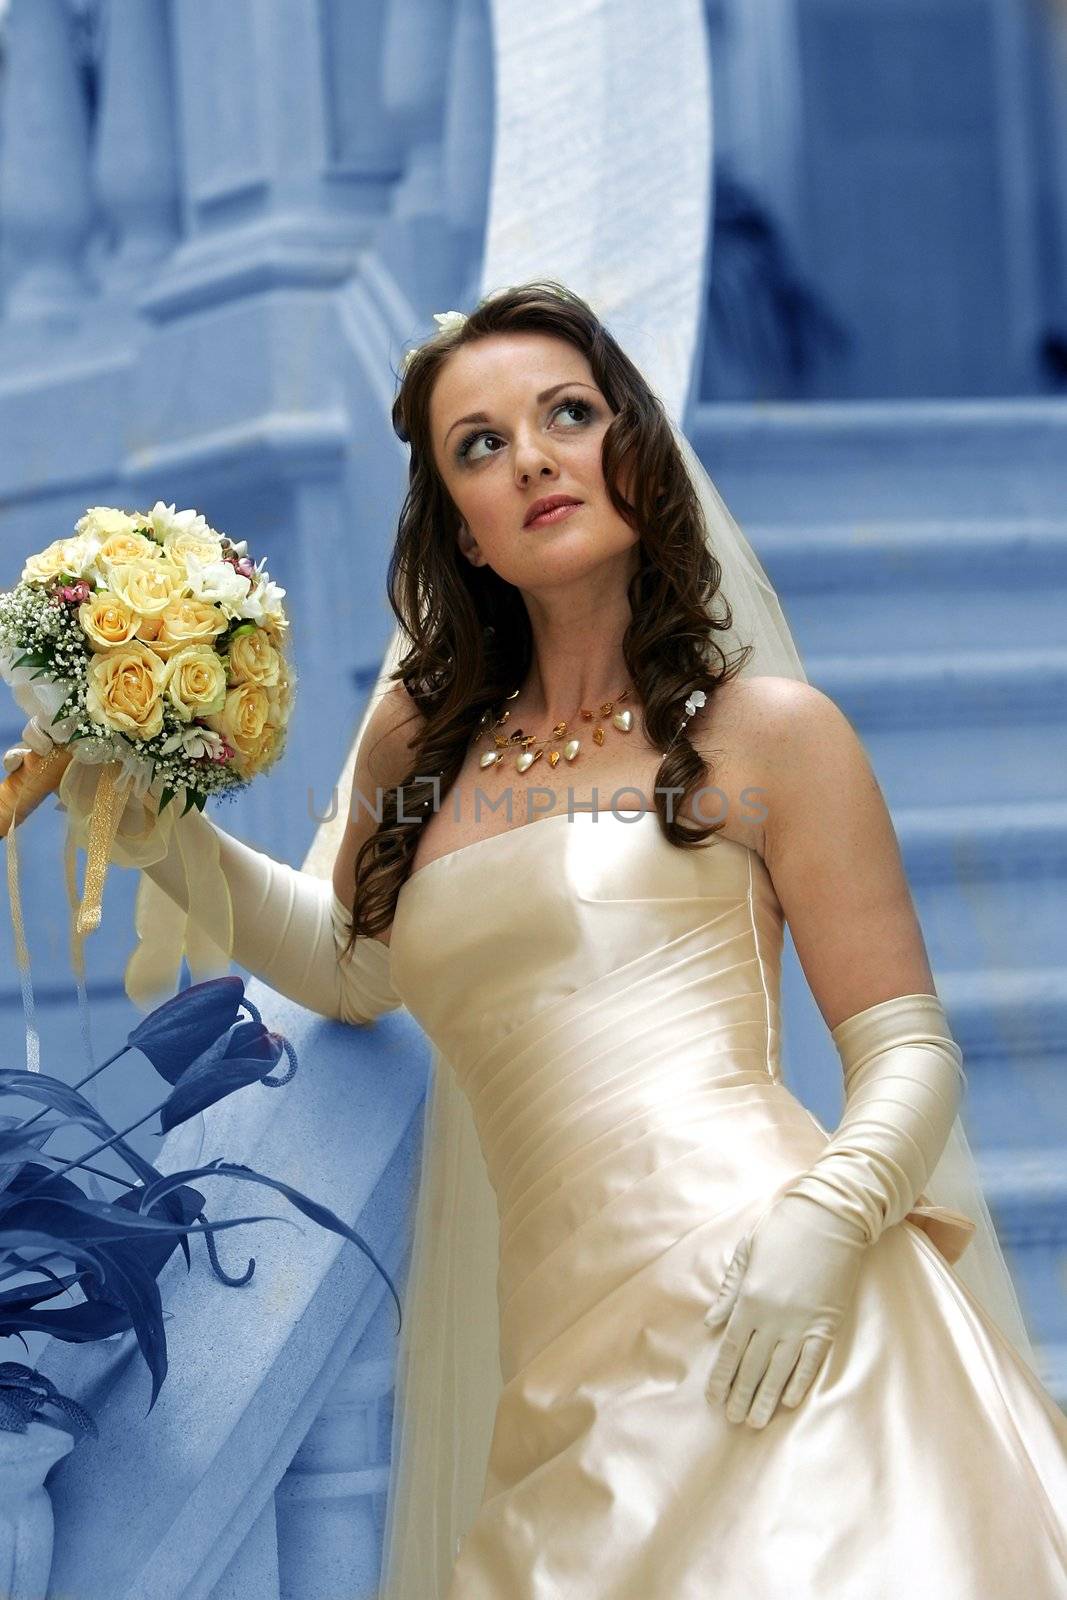 Low angle view of beautiful young bride with bouquet of flowers, blue background.